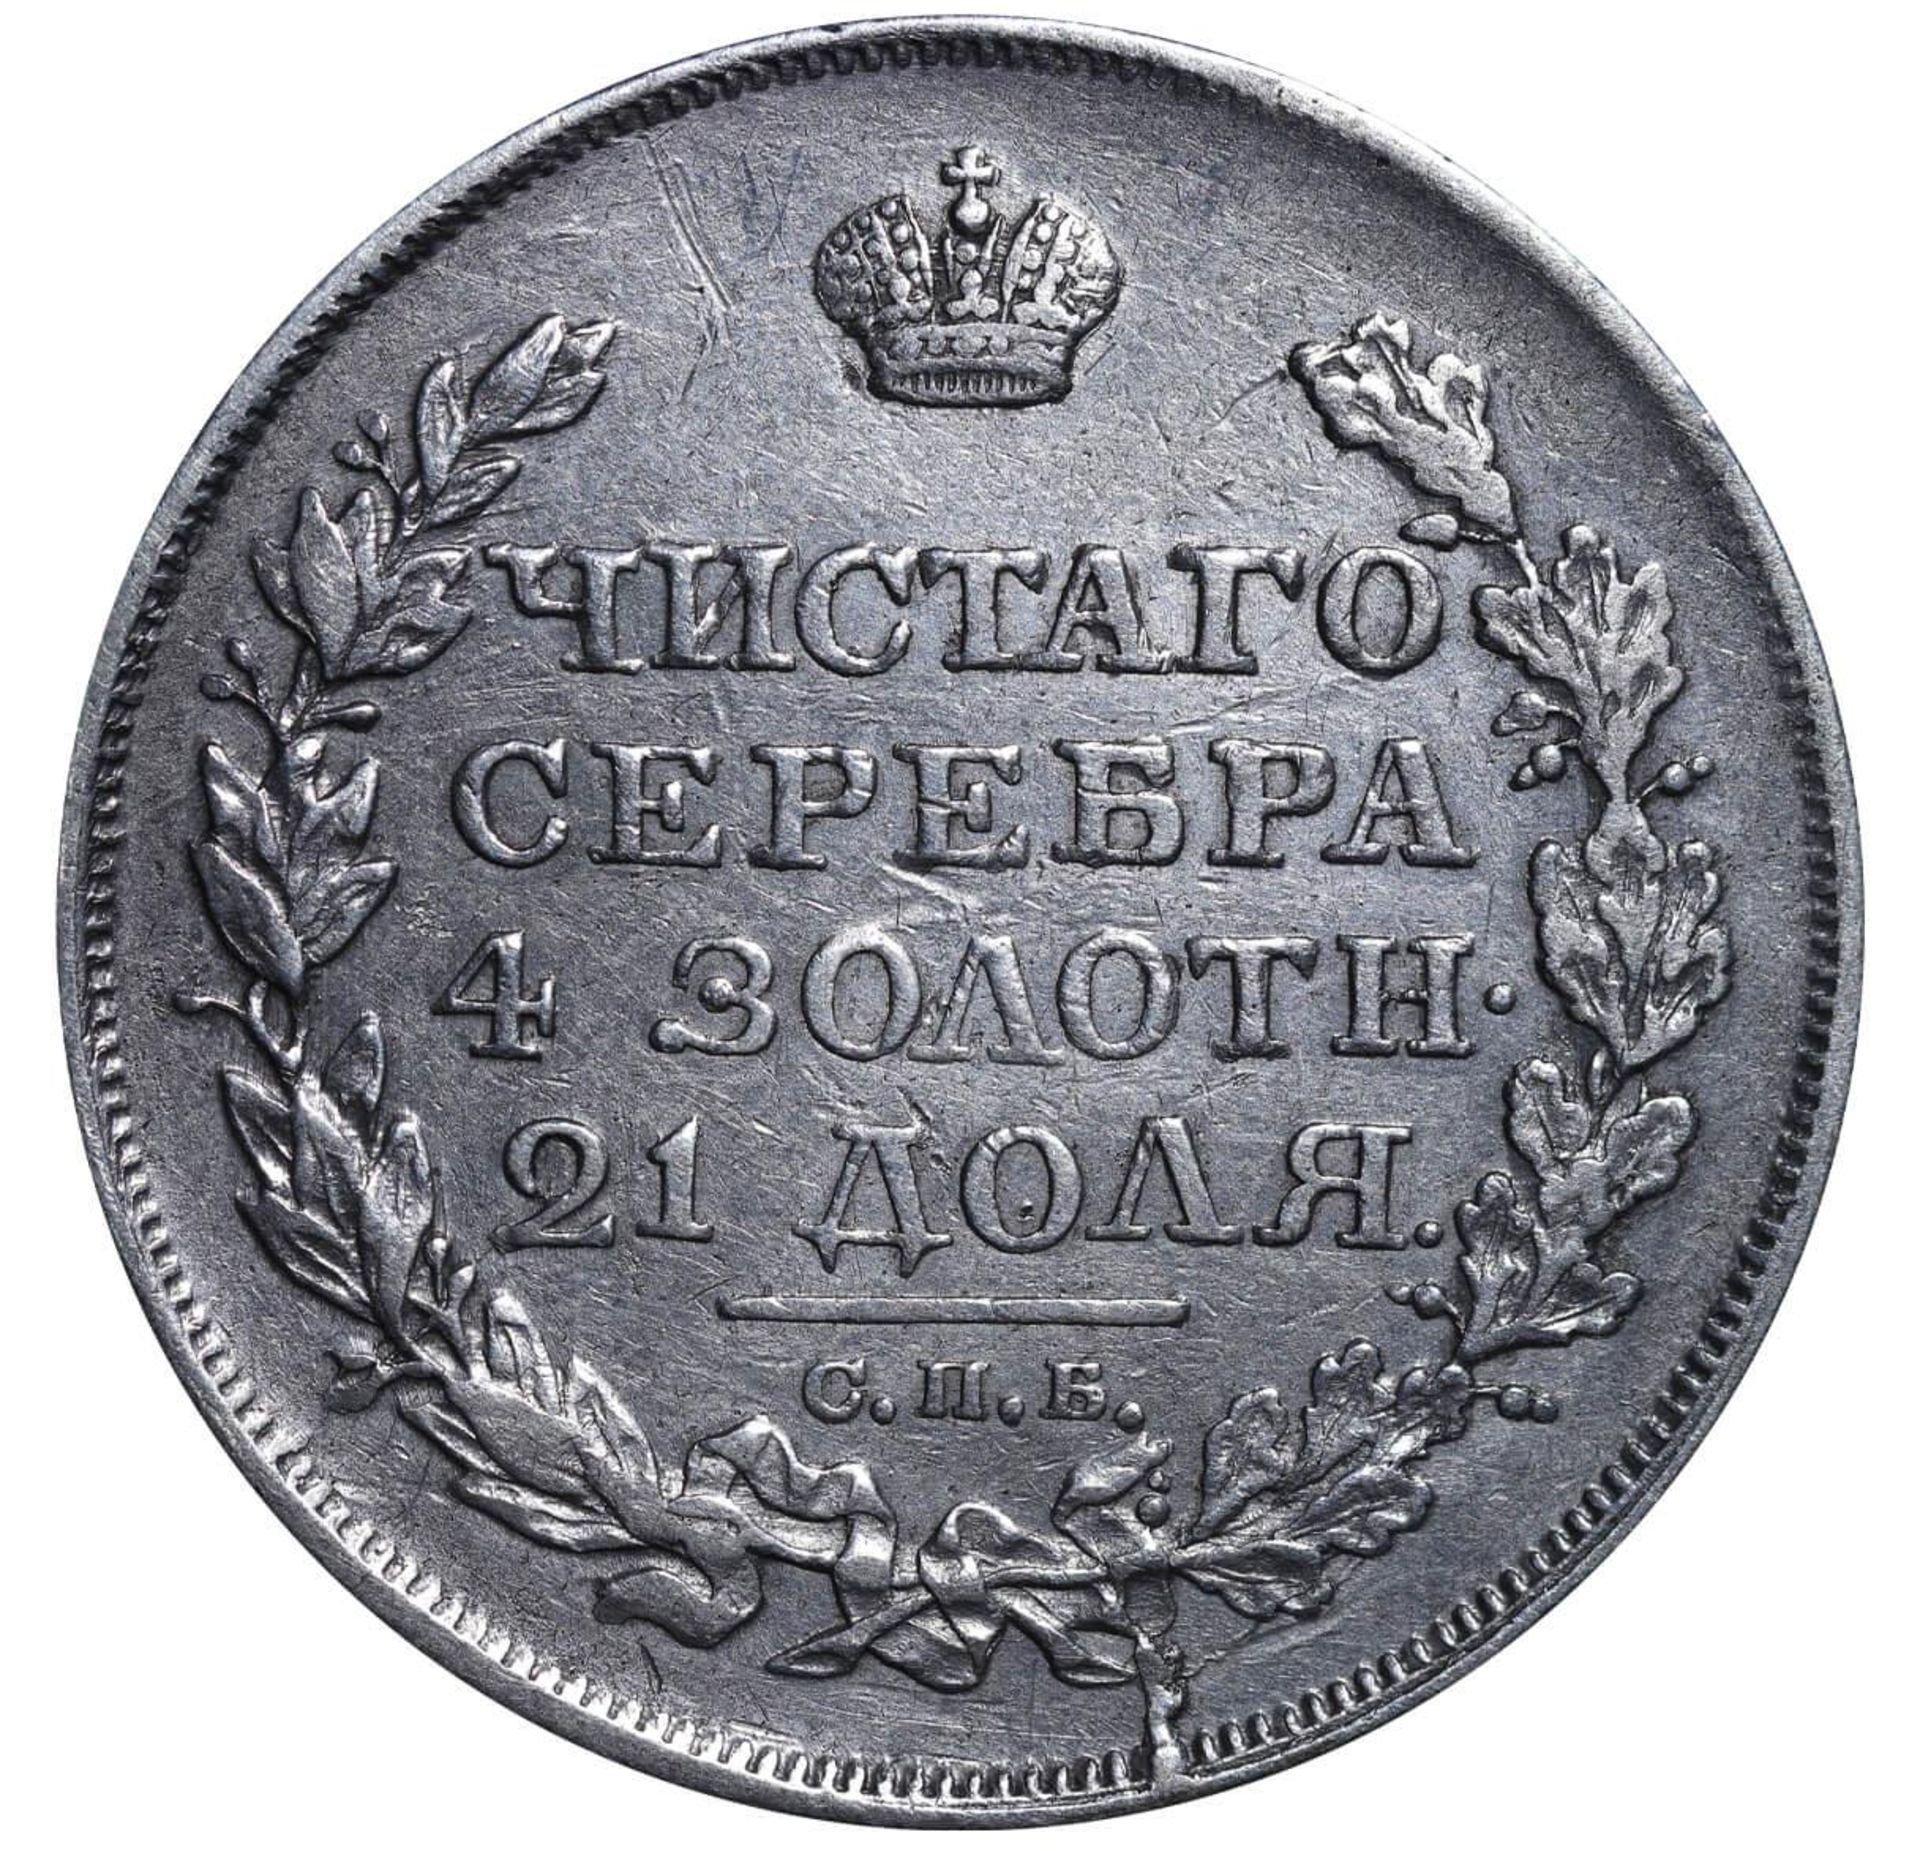 Russian Empire, 1 Rouble, 1818 year, SPB-PS - Image 2 of 3